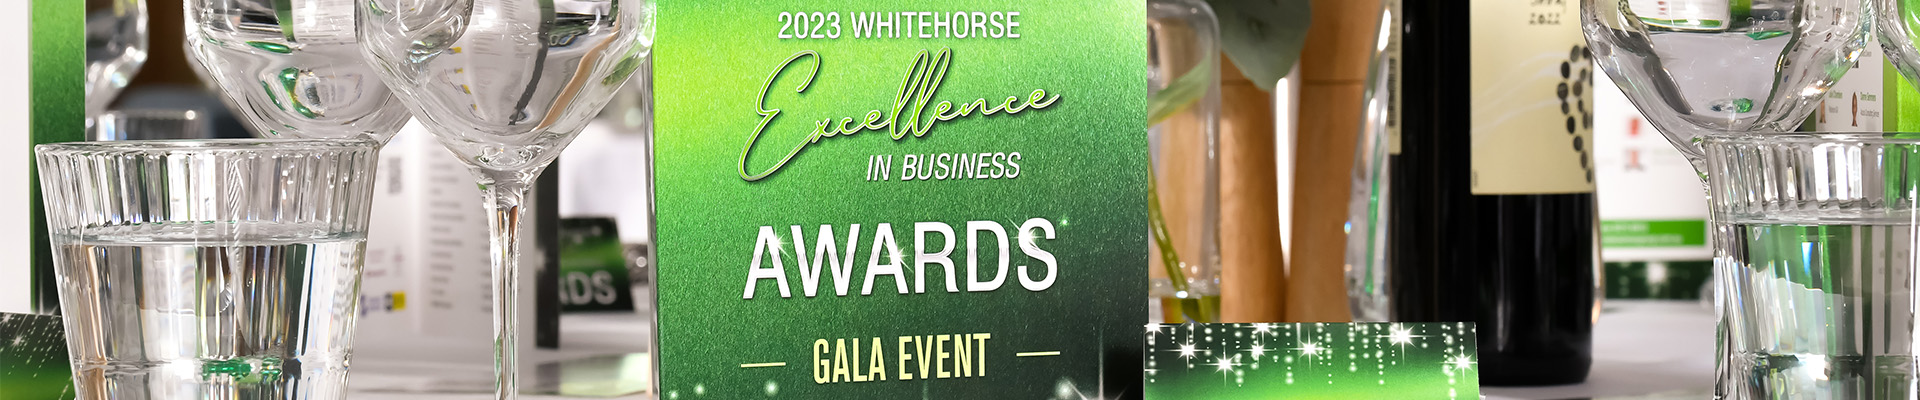 2023 Business Awards Gallery